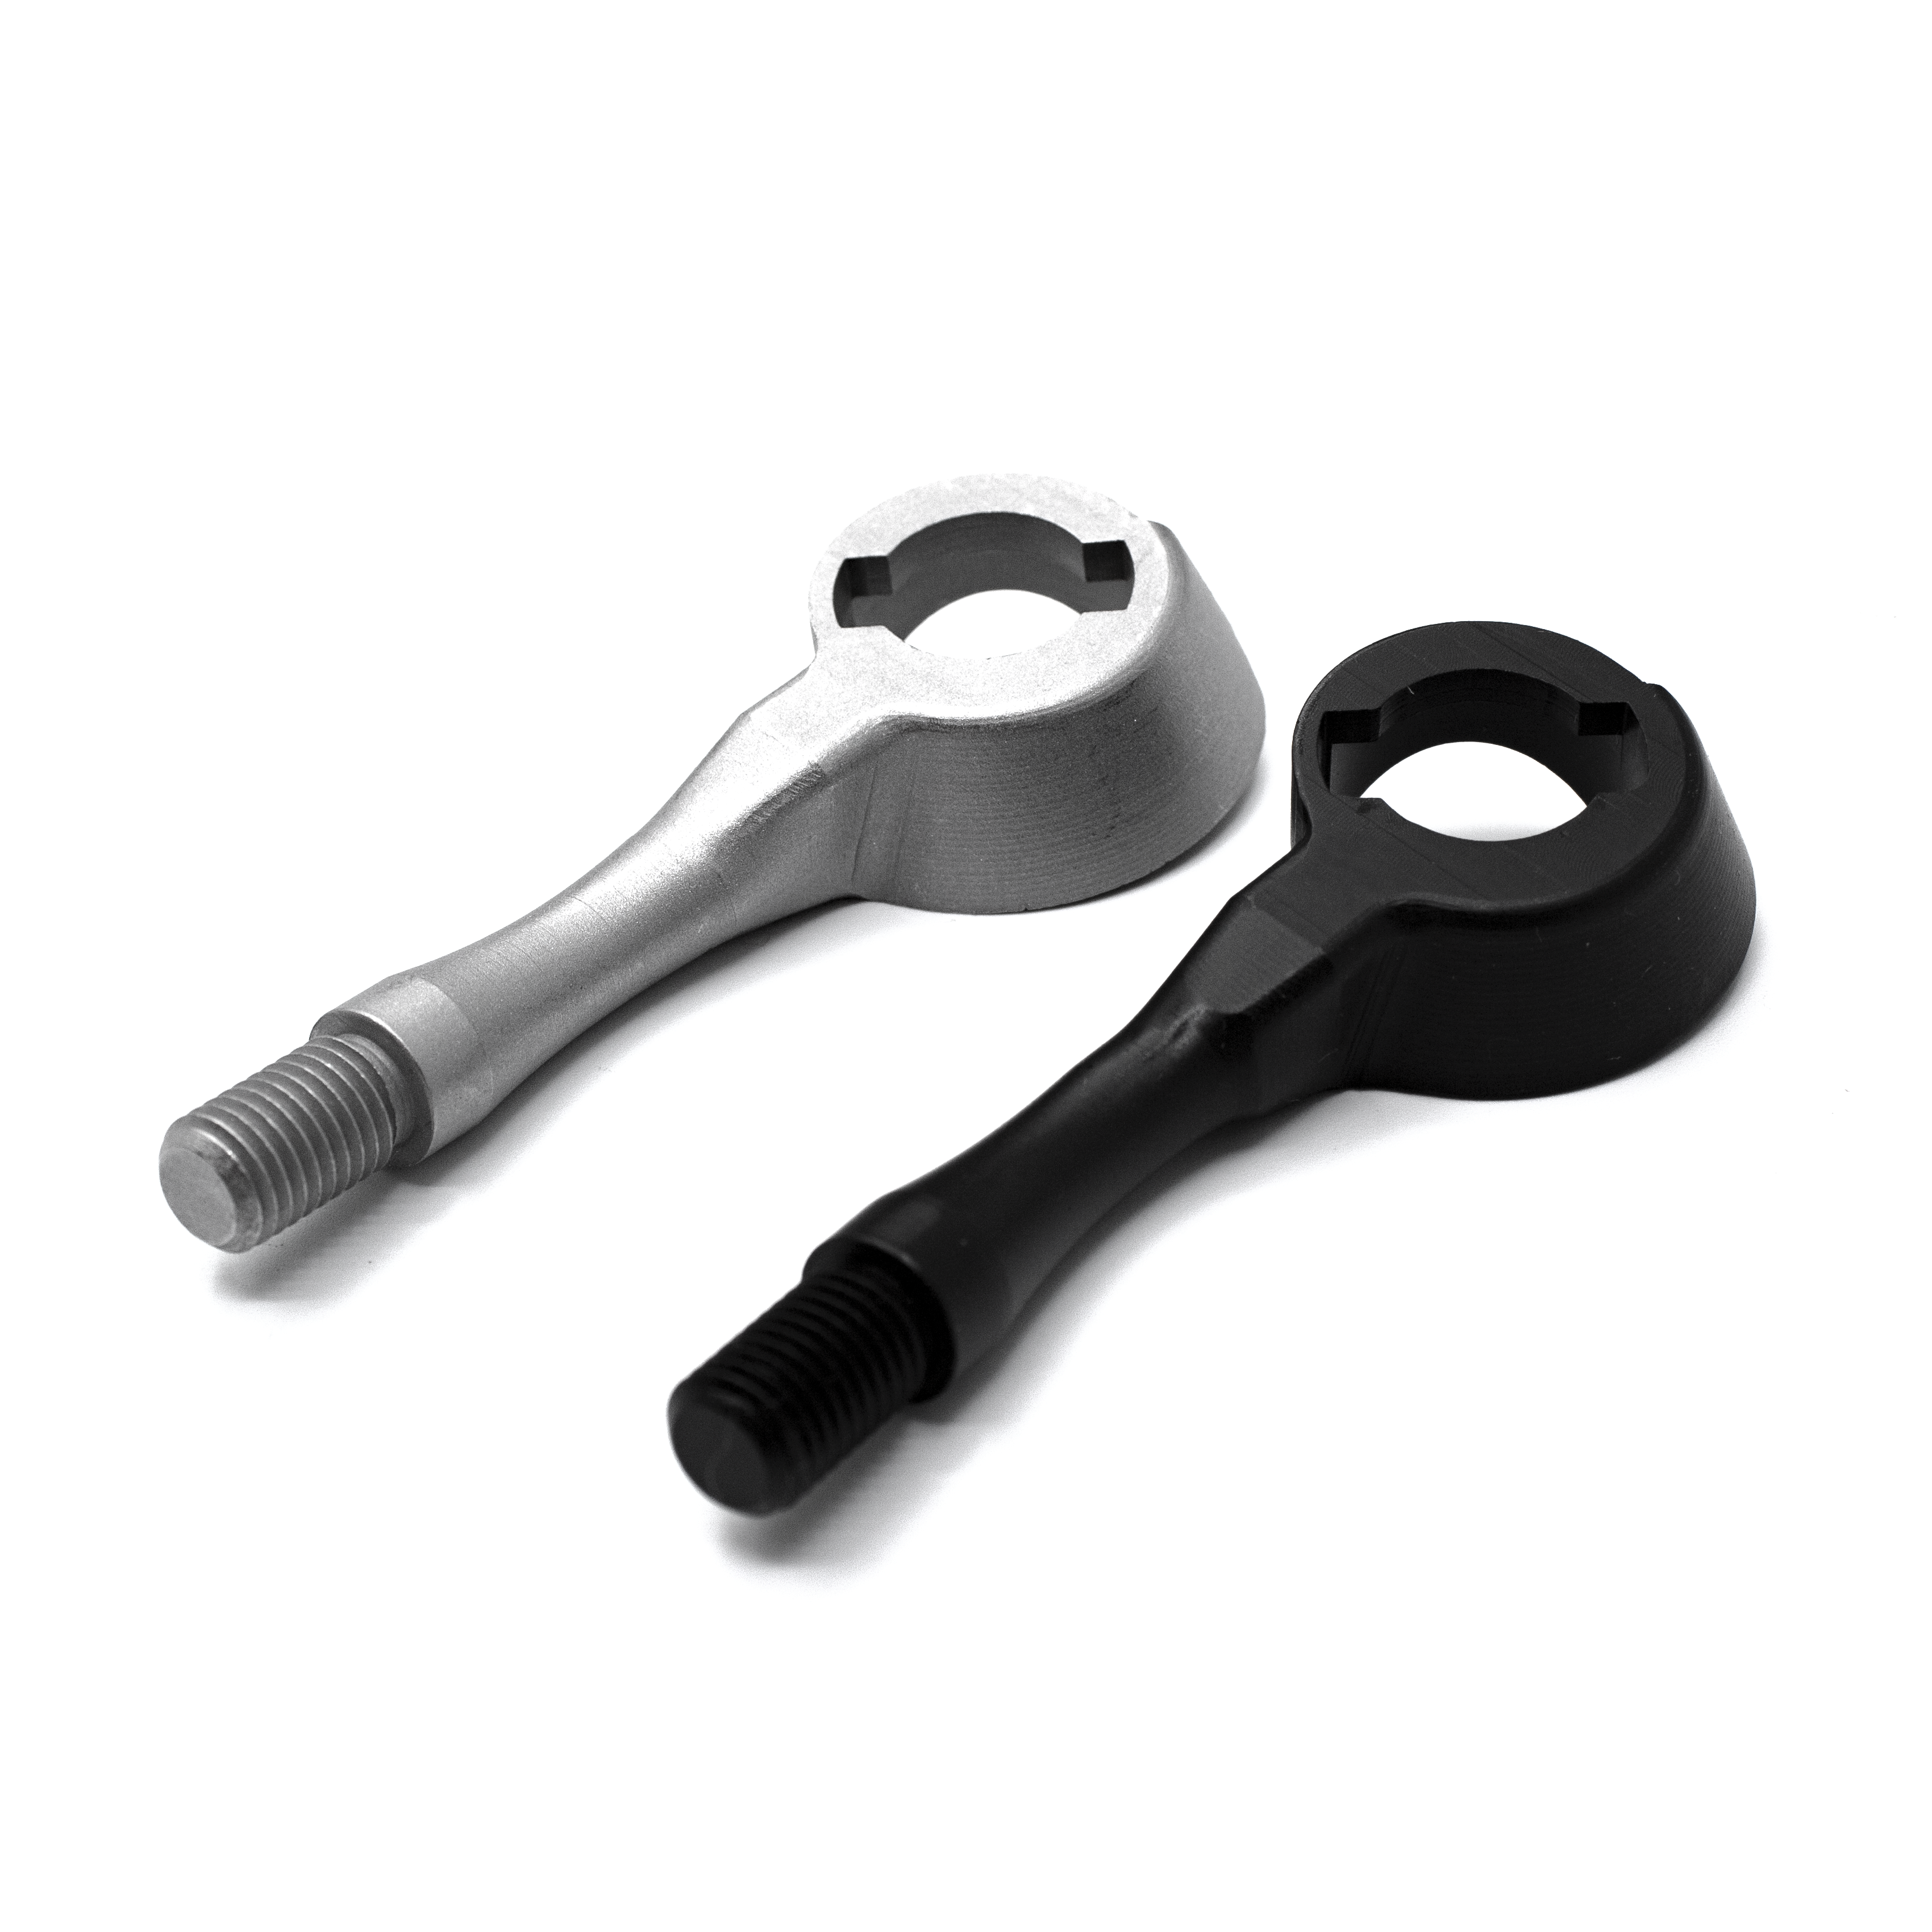 is this bolt handle now available in 110 ultralight left hand